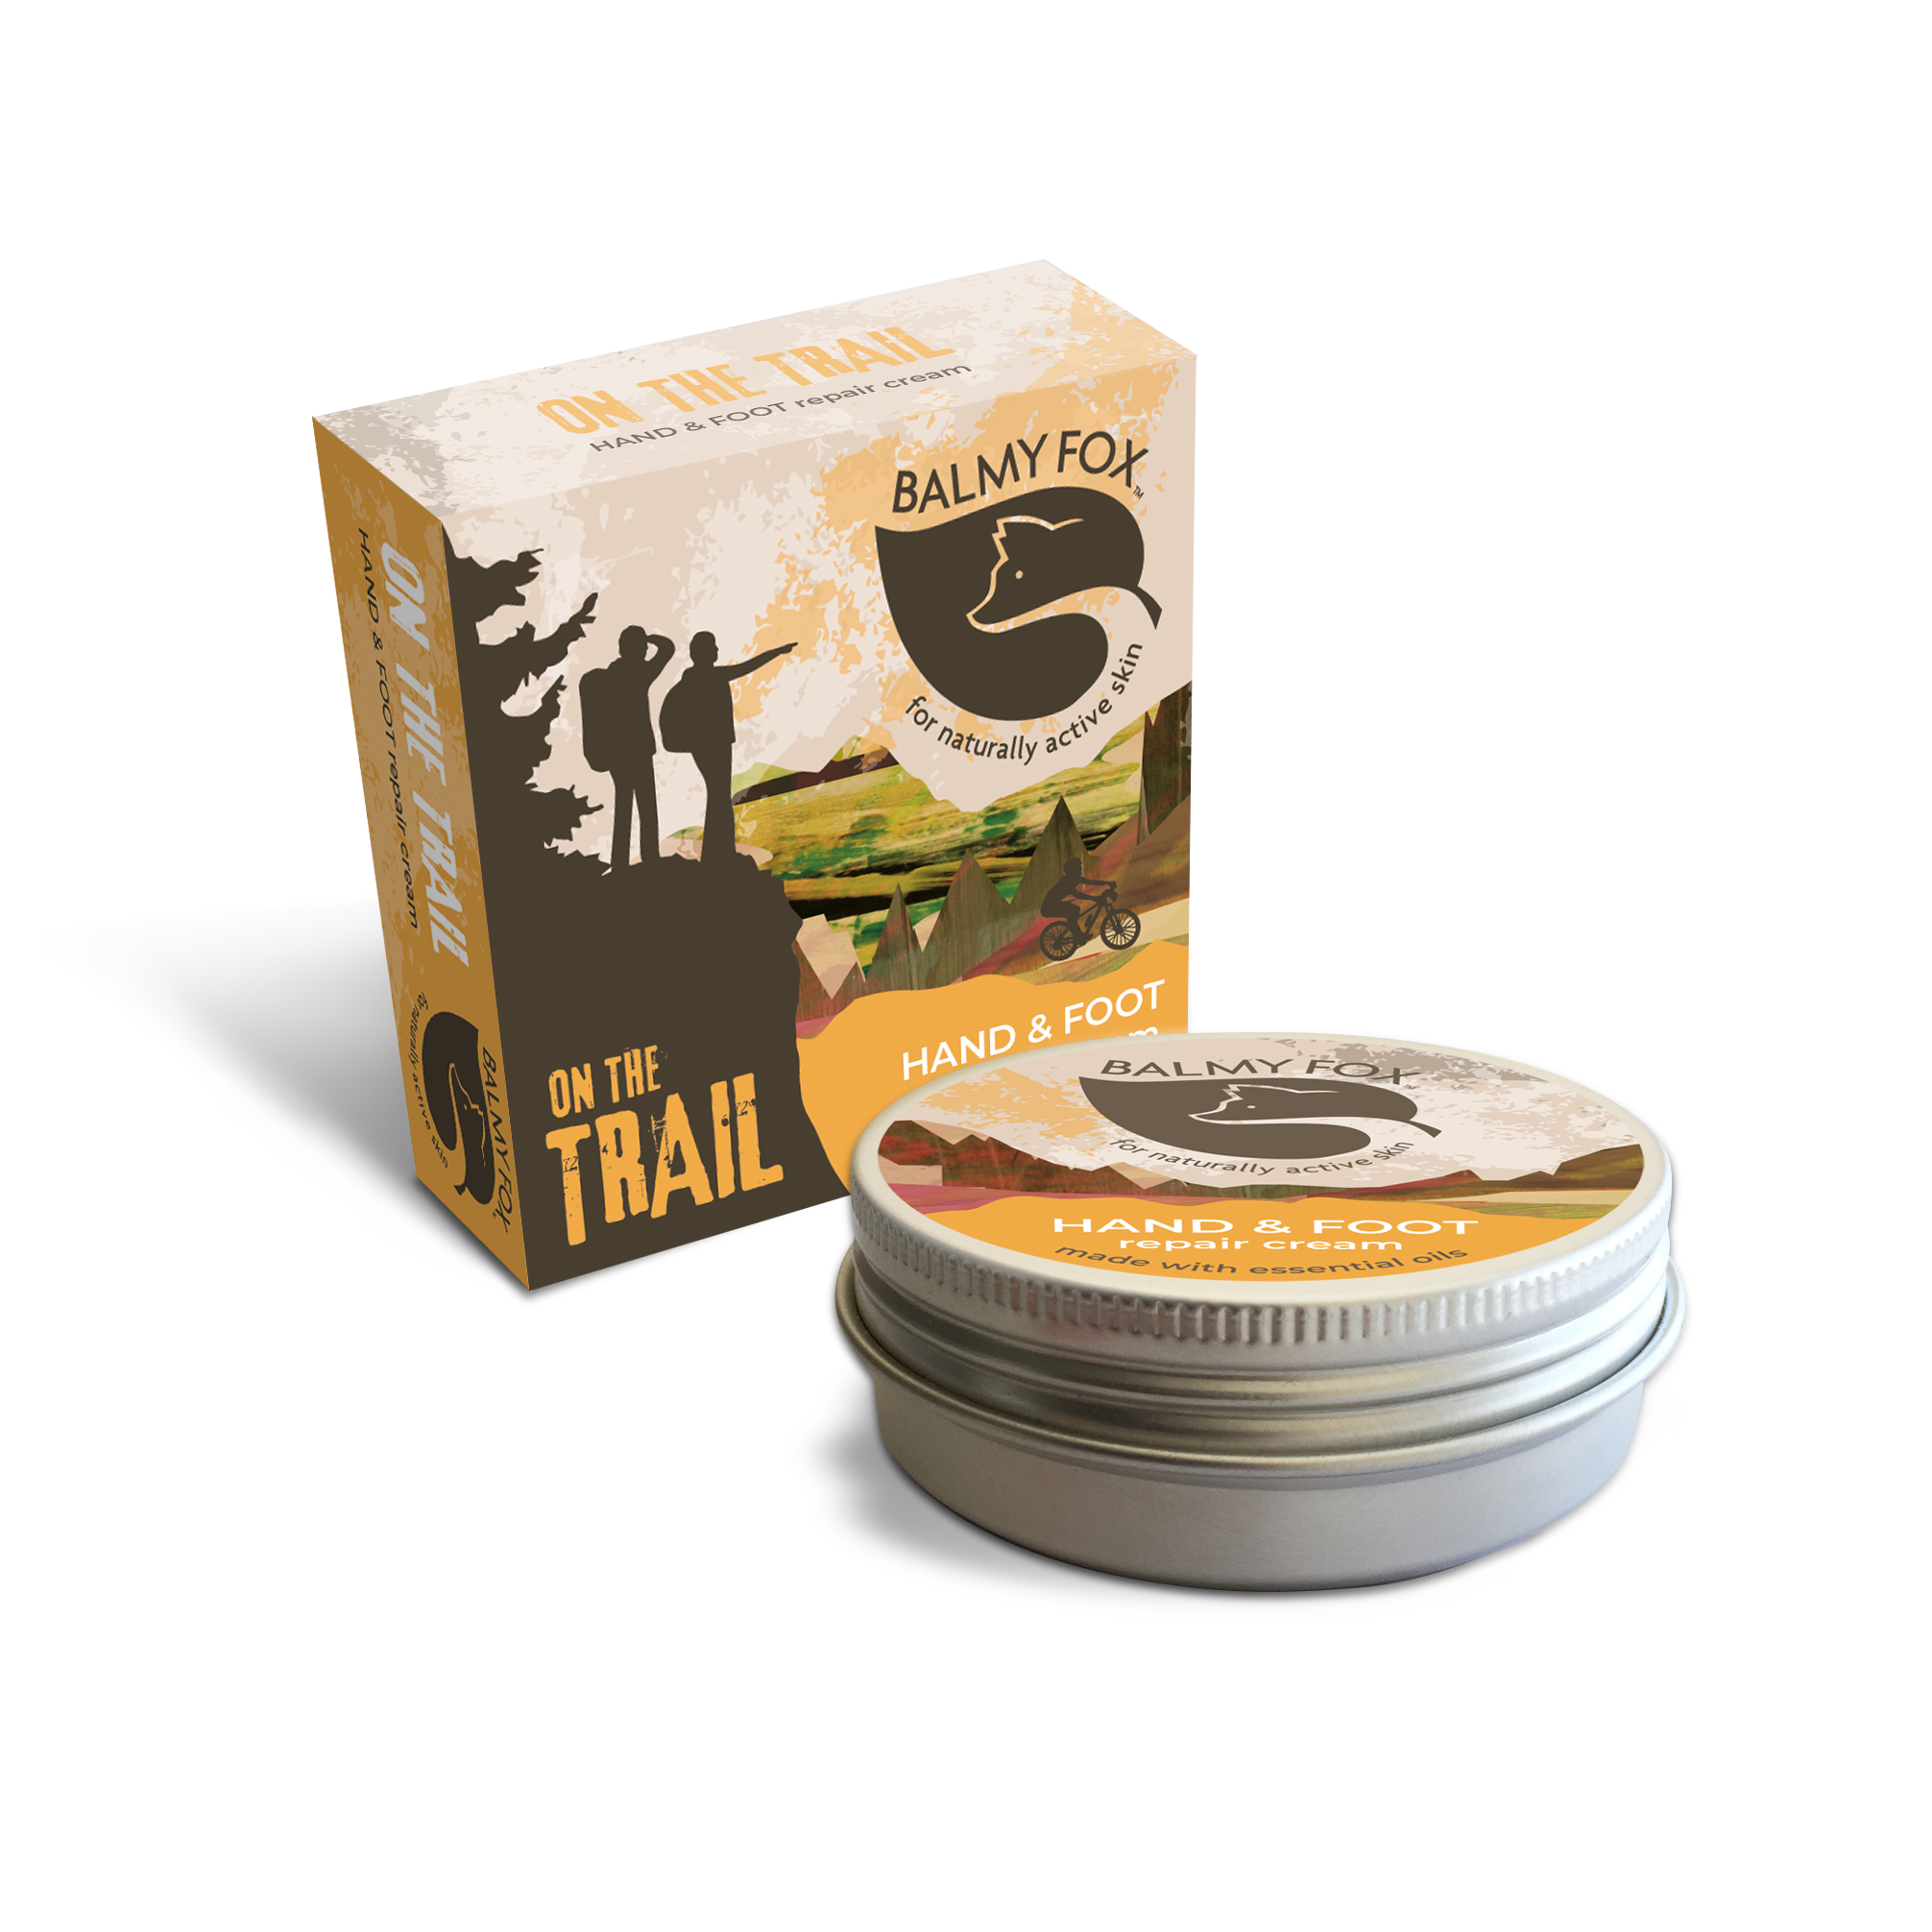 Balmy Fox hand & foot cream for outdoor pursuits